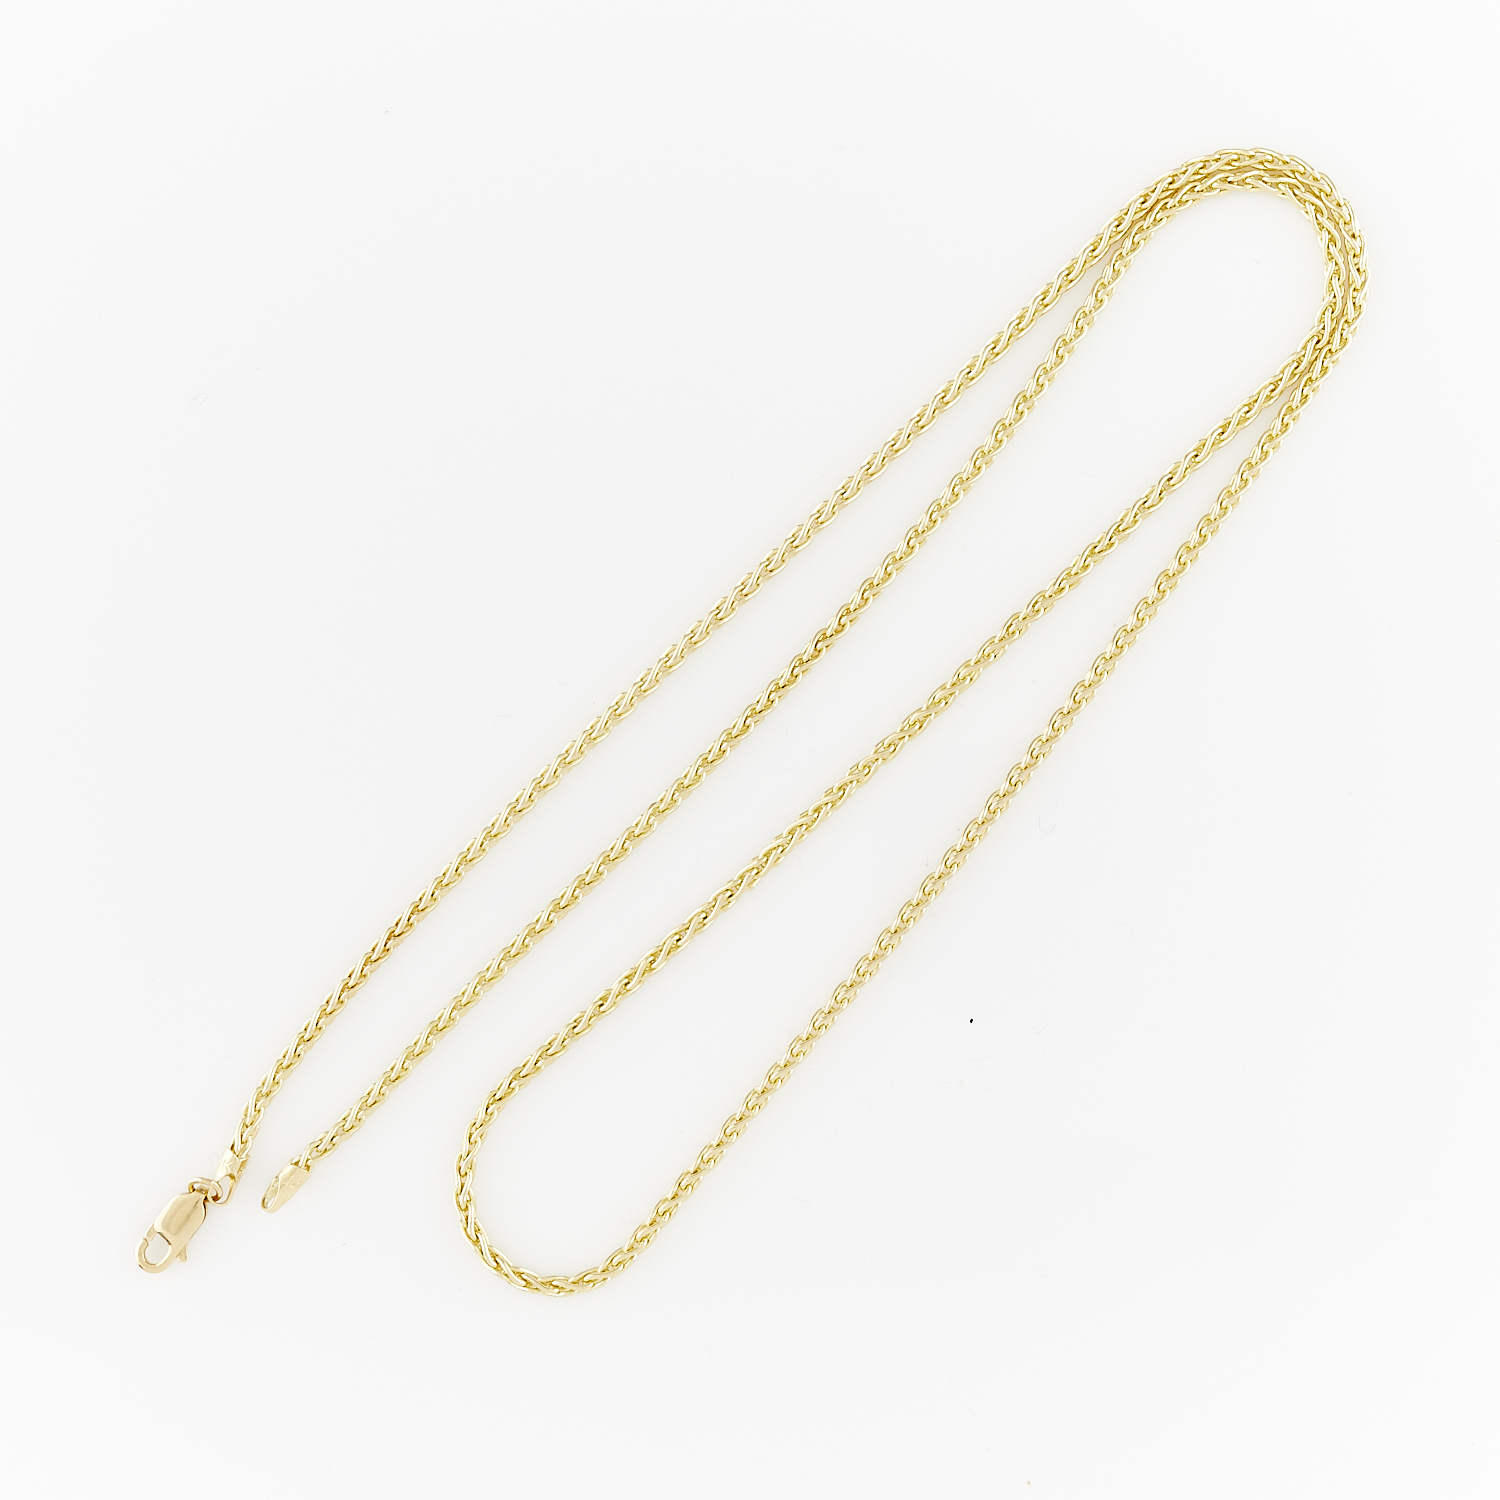 14k Yellow Gold Rolled Wheat Chain - Image 4 of 8